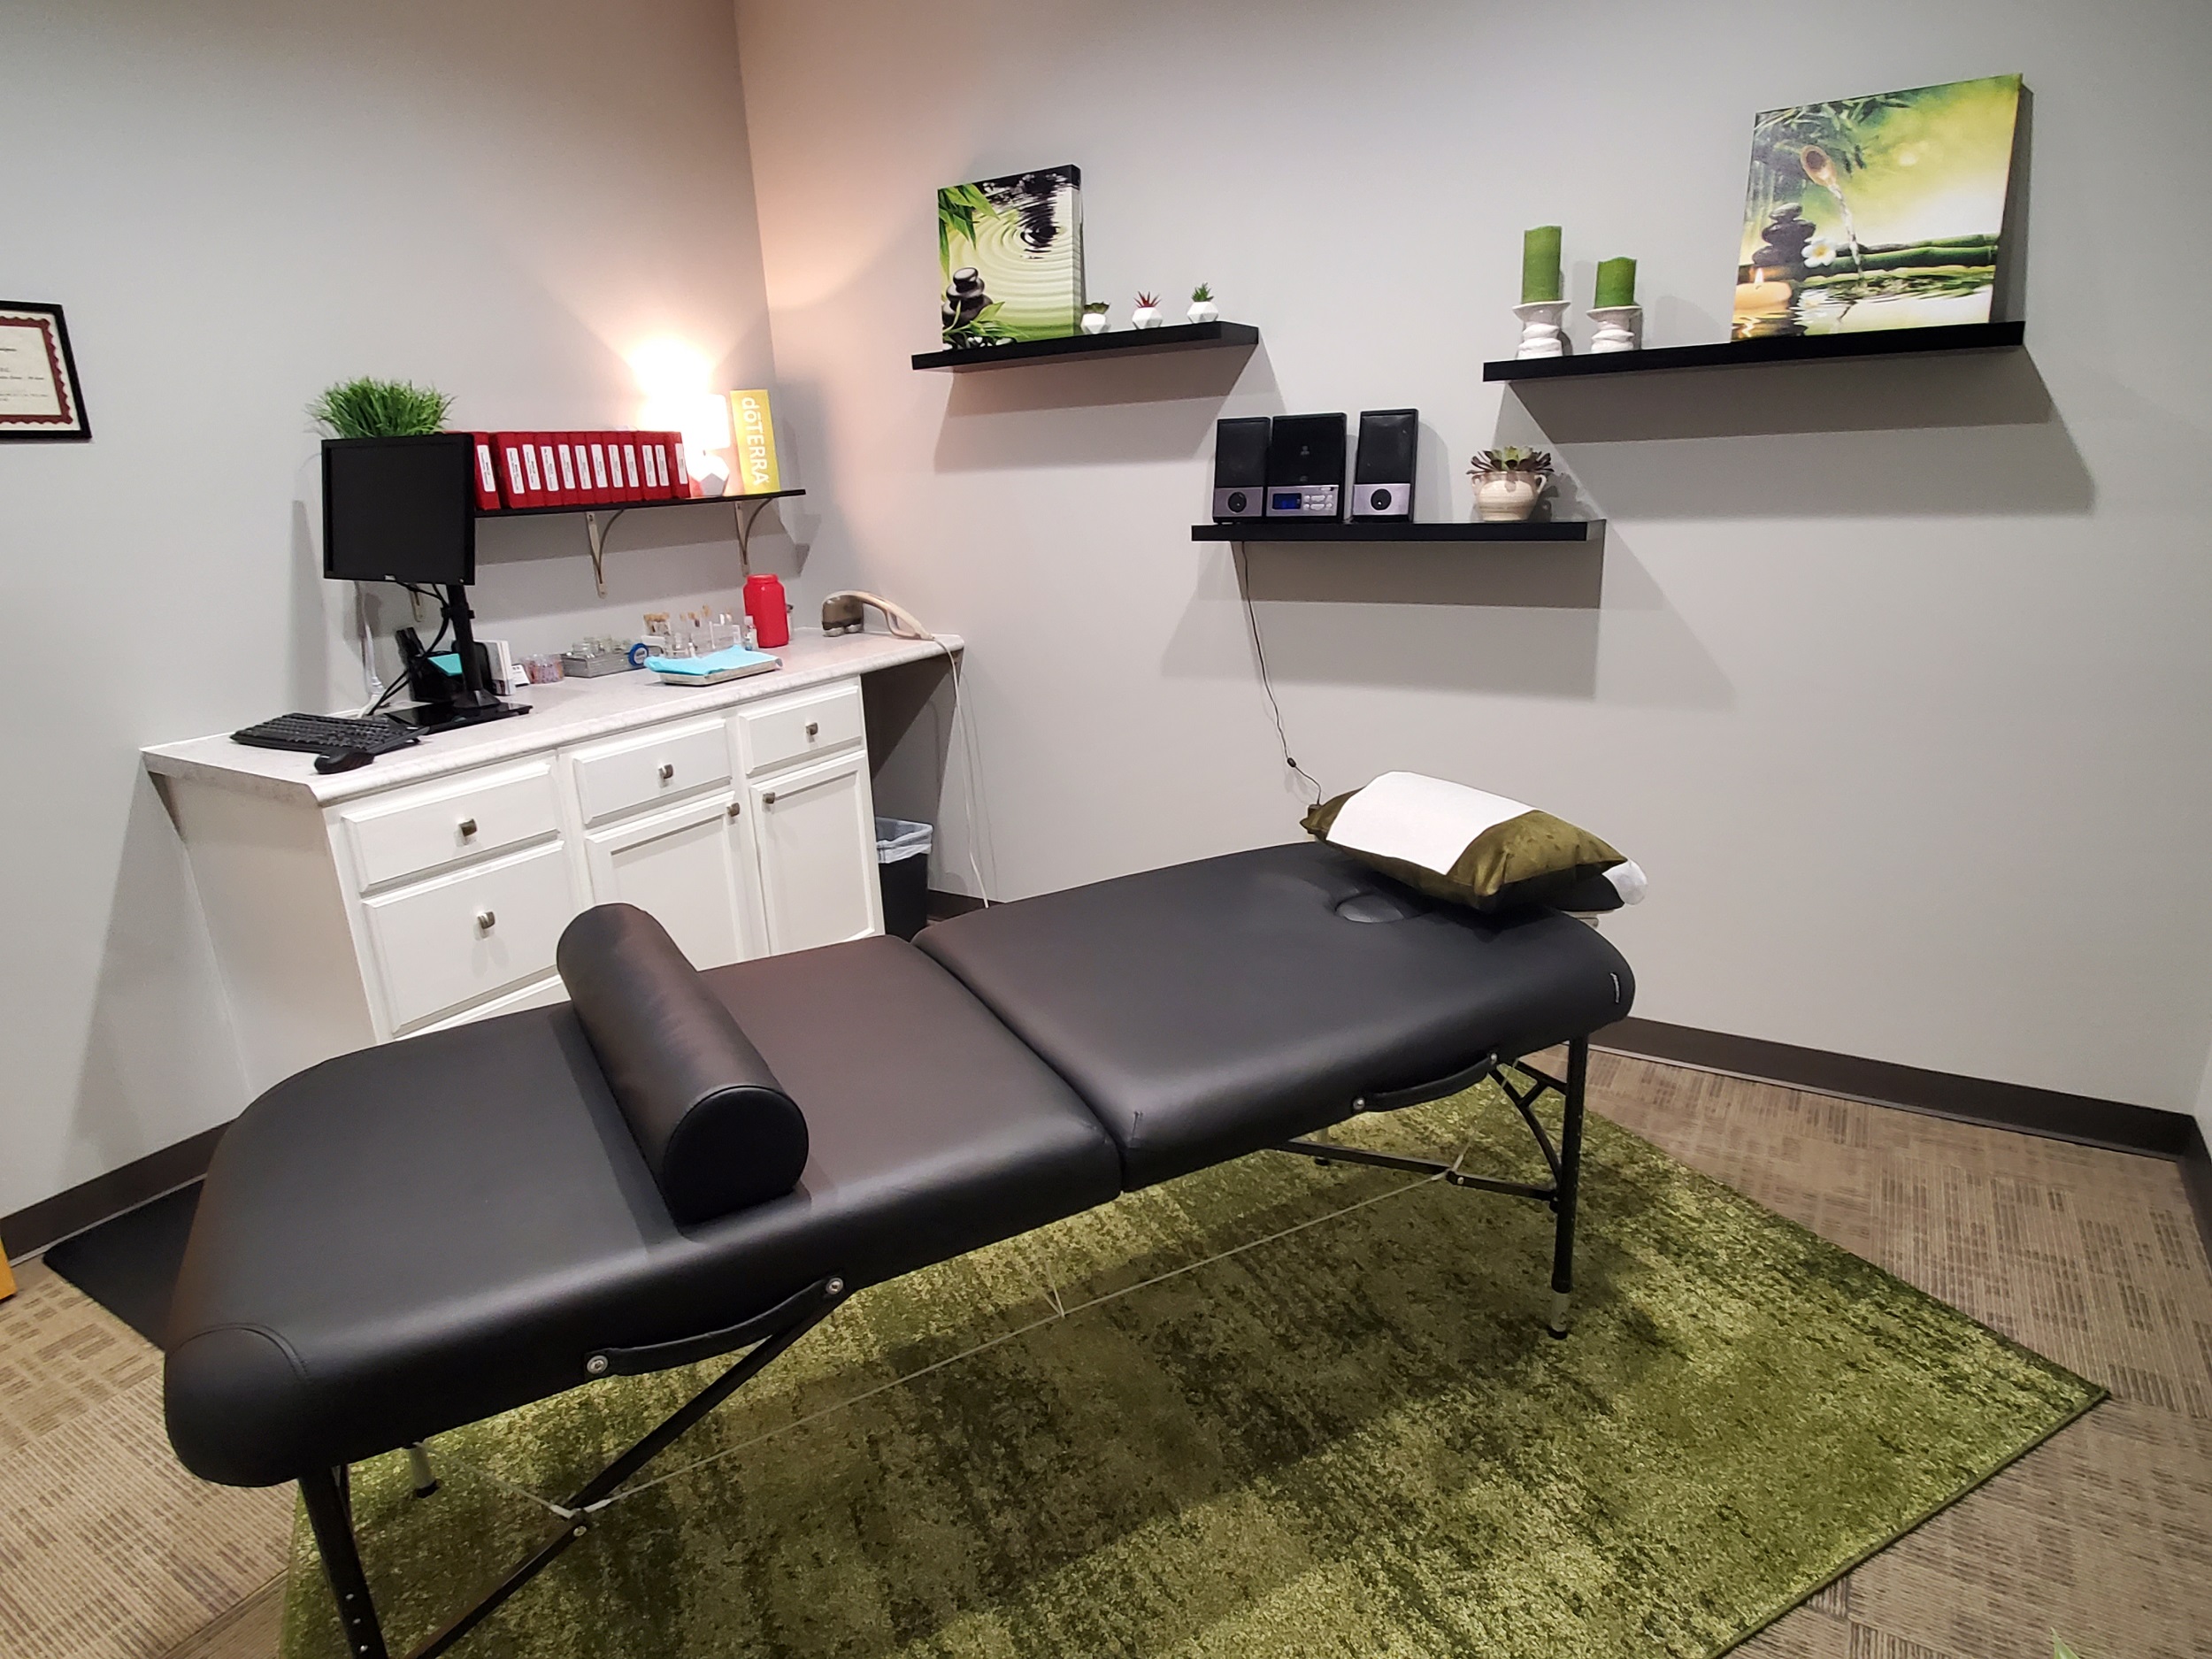 The-Allergy-Spine-Center-Hendersonville-TN-Chiropractic-Acupuncture-Allergy-testing-functional-medicine